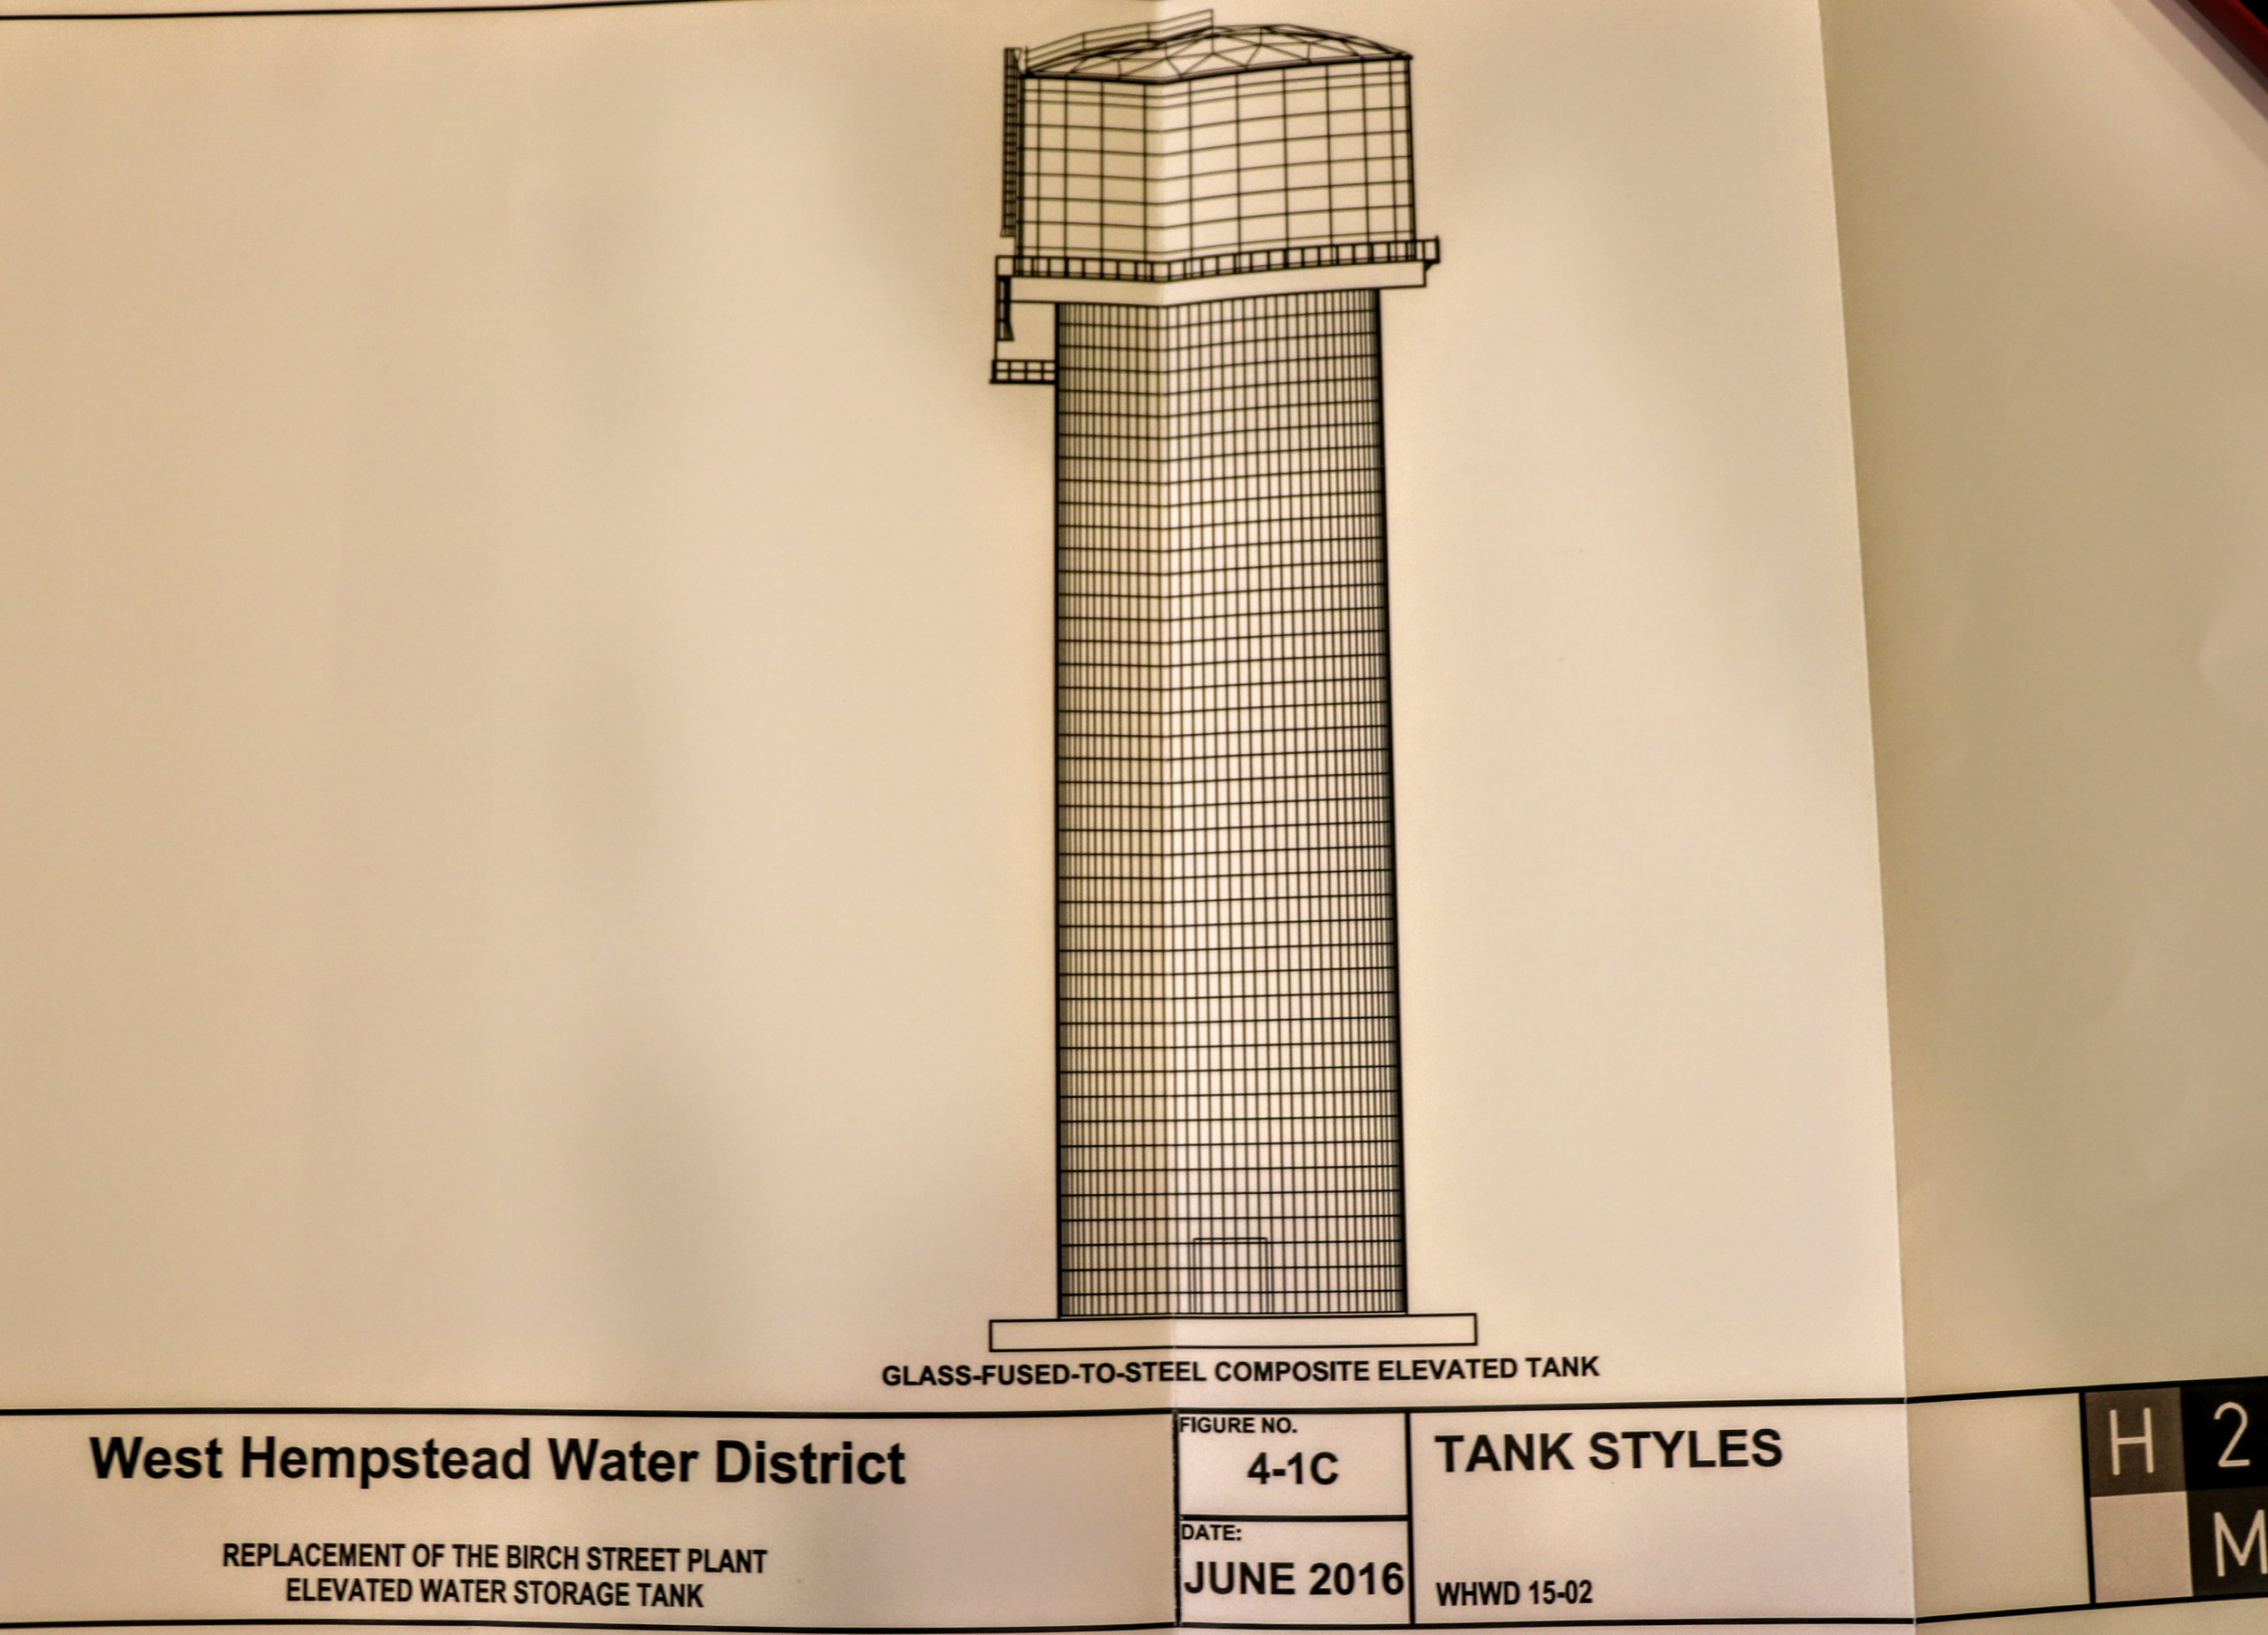 Among the styles under consideration for the water tank’s replacement include this glass-fused-to-steel design.